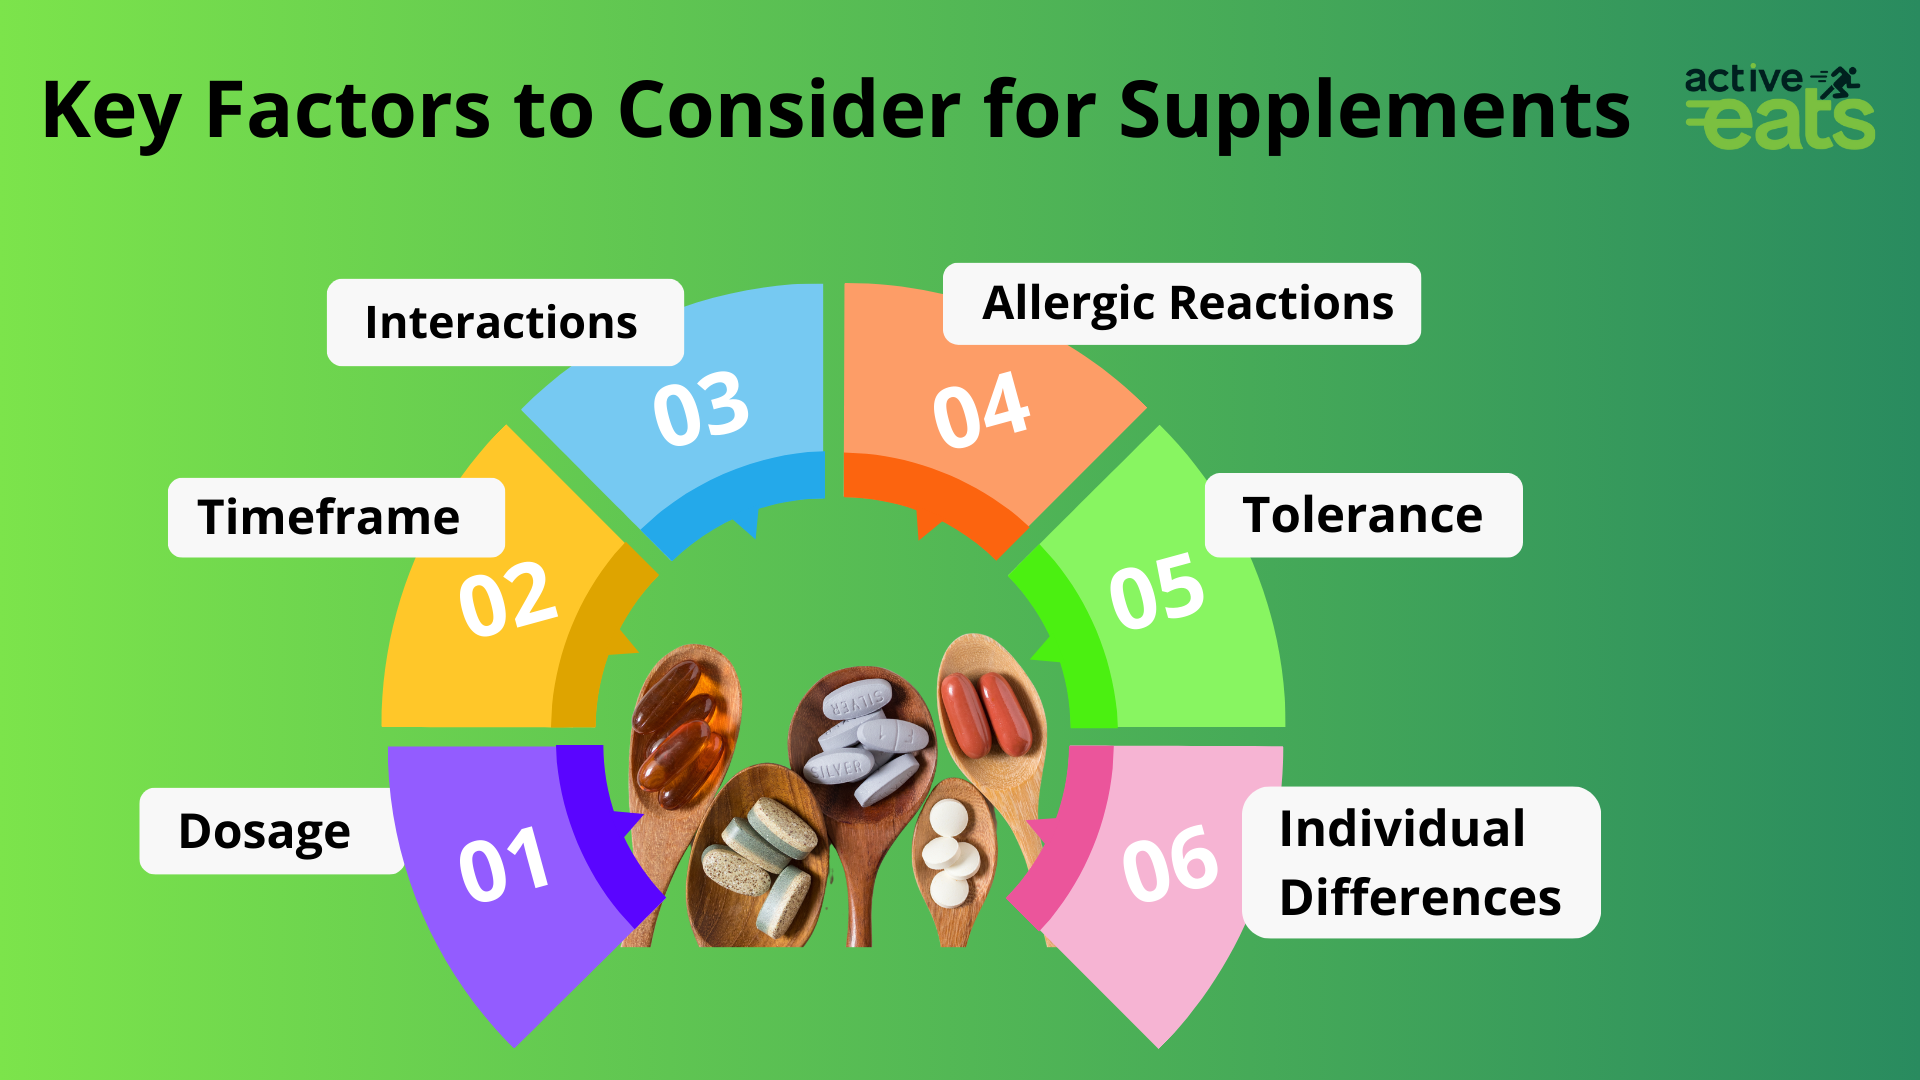 A visual guide featuring the key factors to consider when selecting supplements. The image includes various factors such as product quality, ingredient list, dosage instructions, potential side effects, and product reviews. These elements are illustrated with clear, easy-to-understand graphics and labels, offering a comprehensive overview to aid individuals in making informed decisions when choosing supplements for their health and well-being.